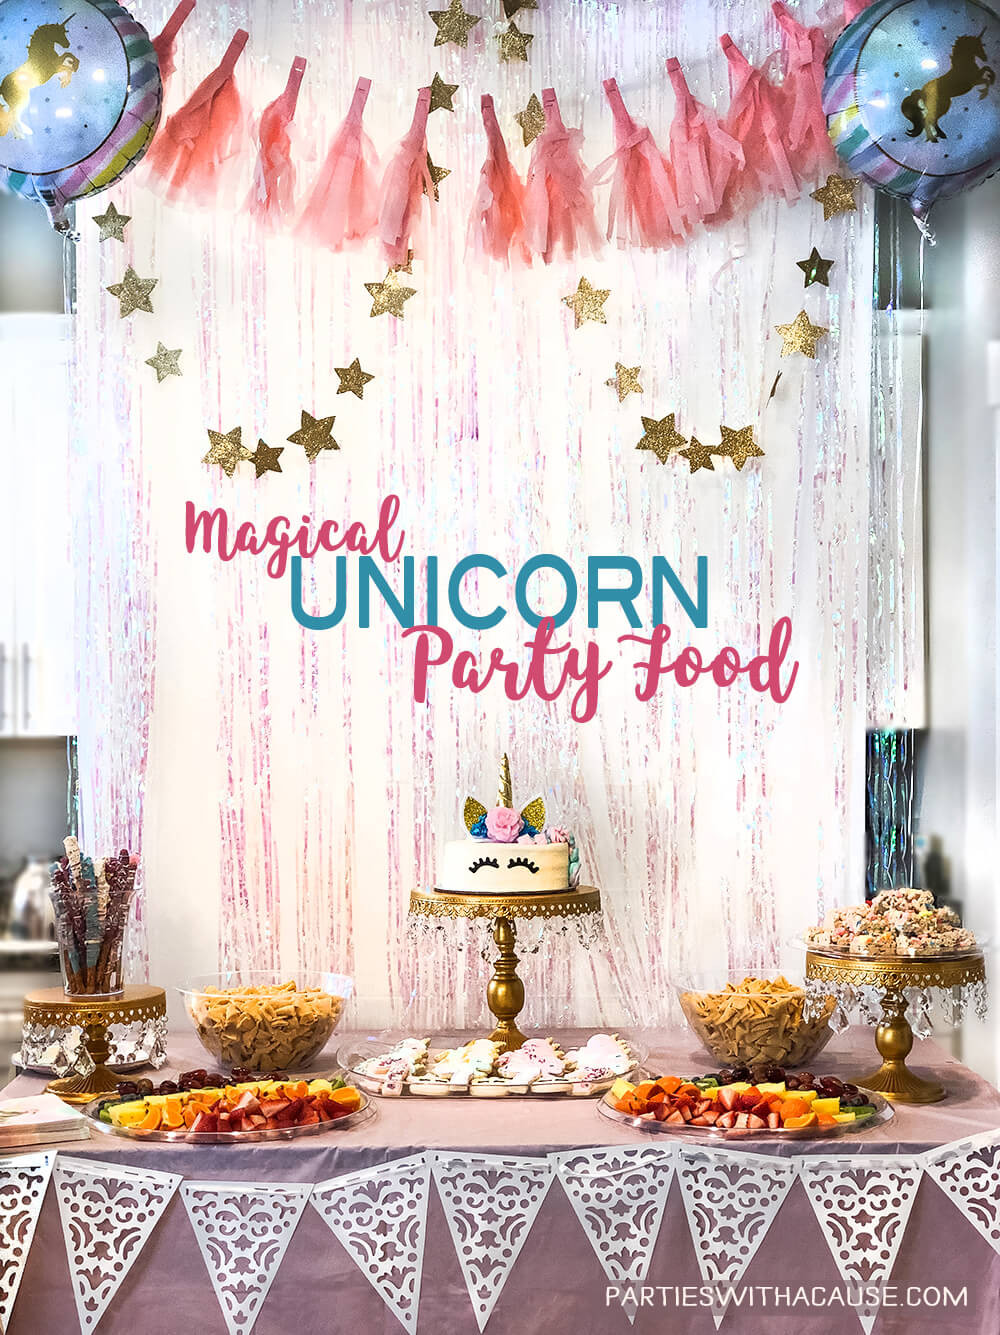 Party Ideas Unicorn Food Glass
 15 Unicorn Birthday Party Food Ideas Parties With A Cause